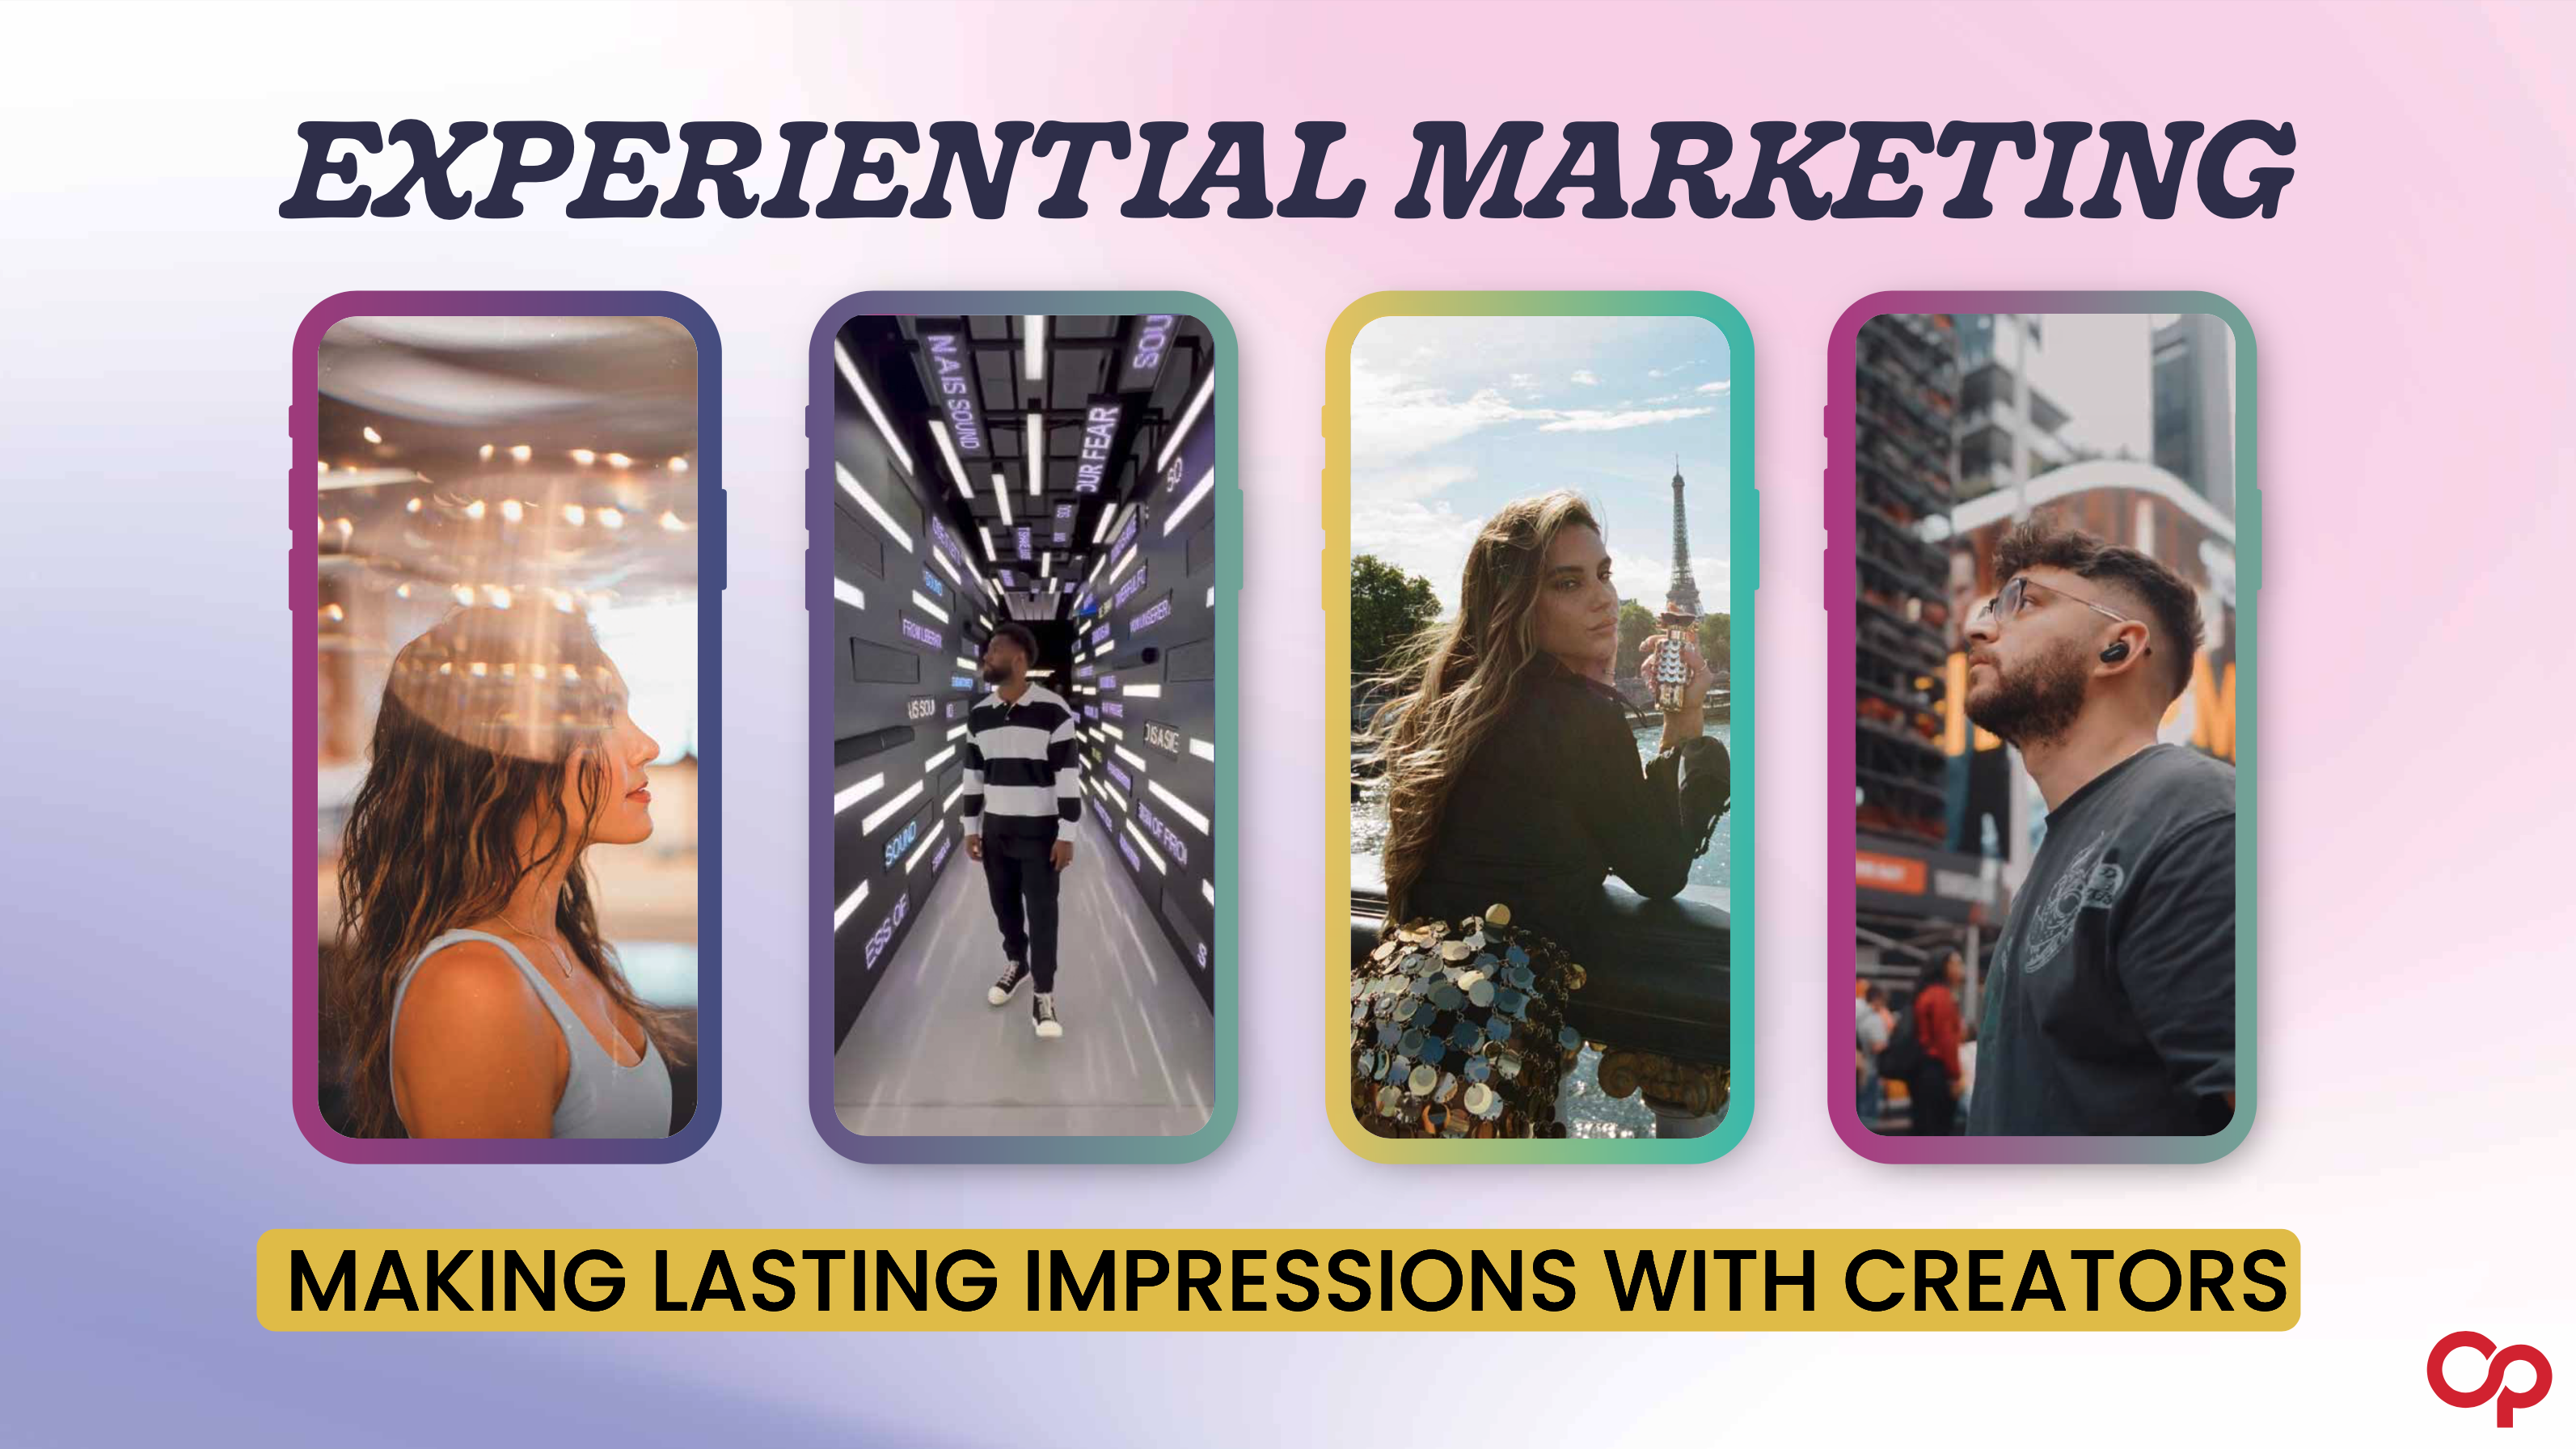 Experiential Marketing Campaigns with Creators